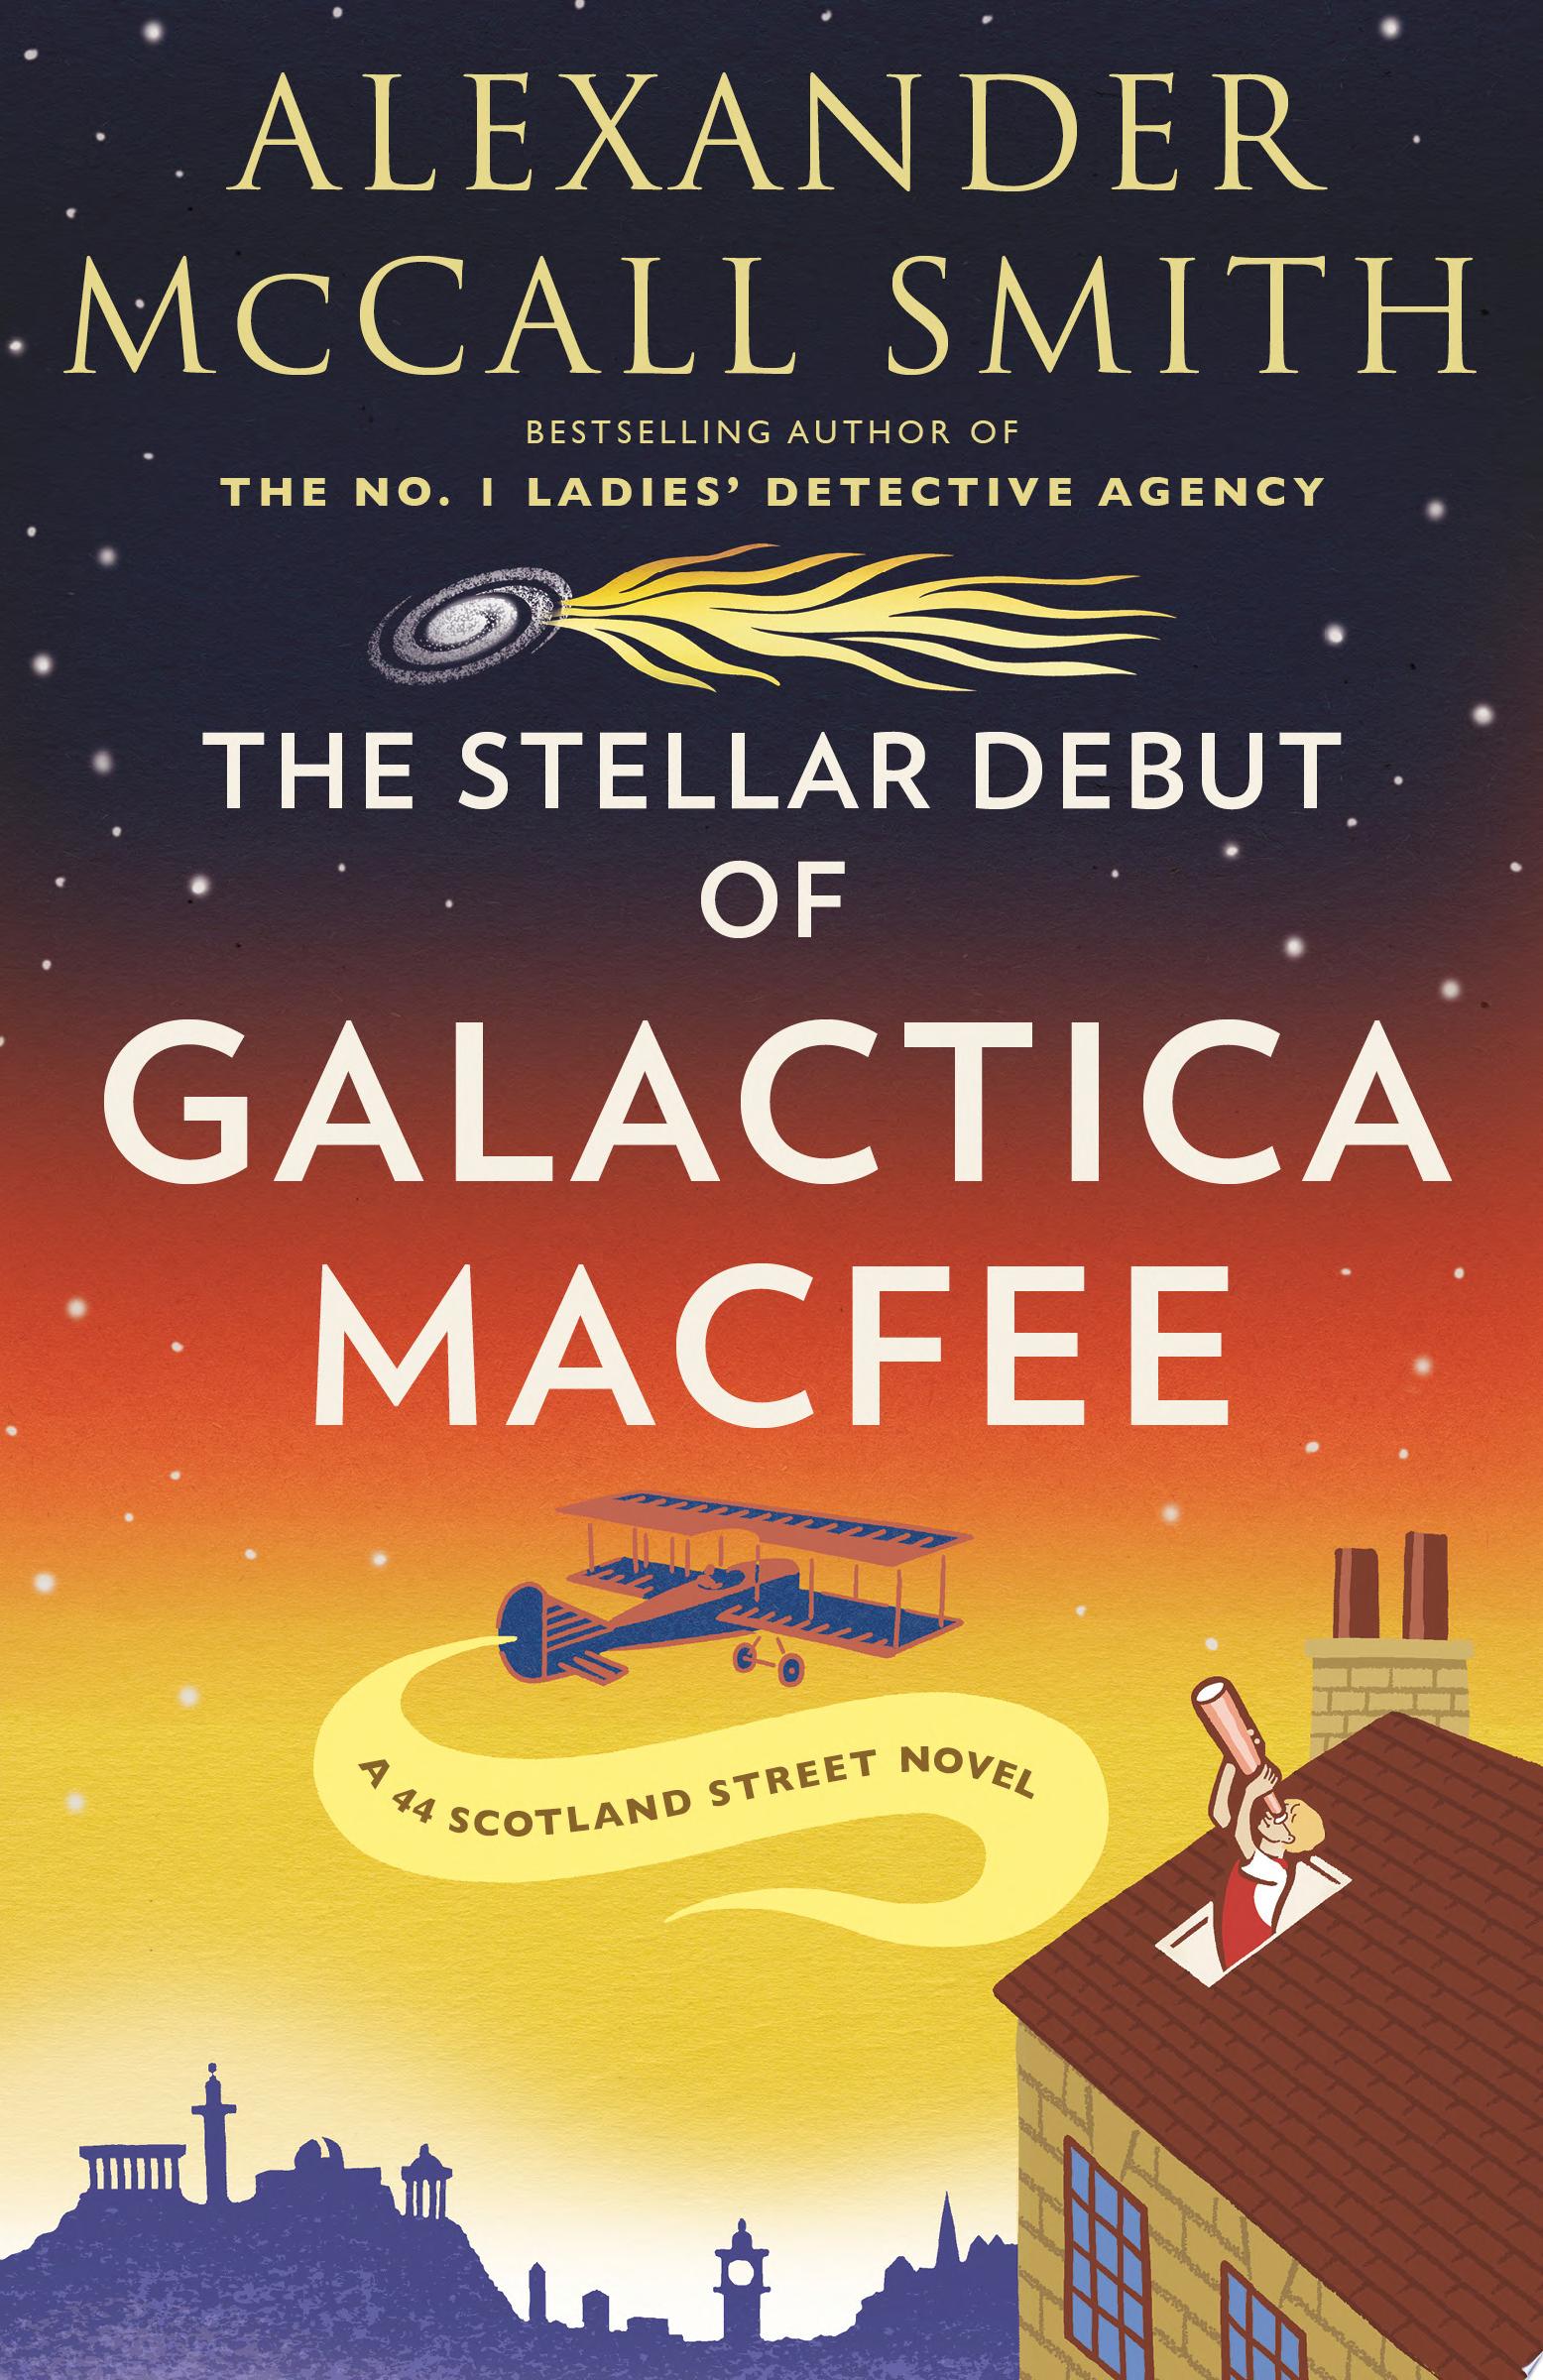 Image for "The Stellar Debut of Galactica MacFee"